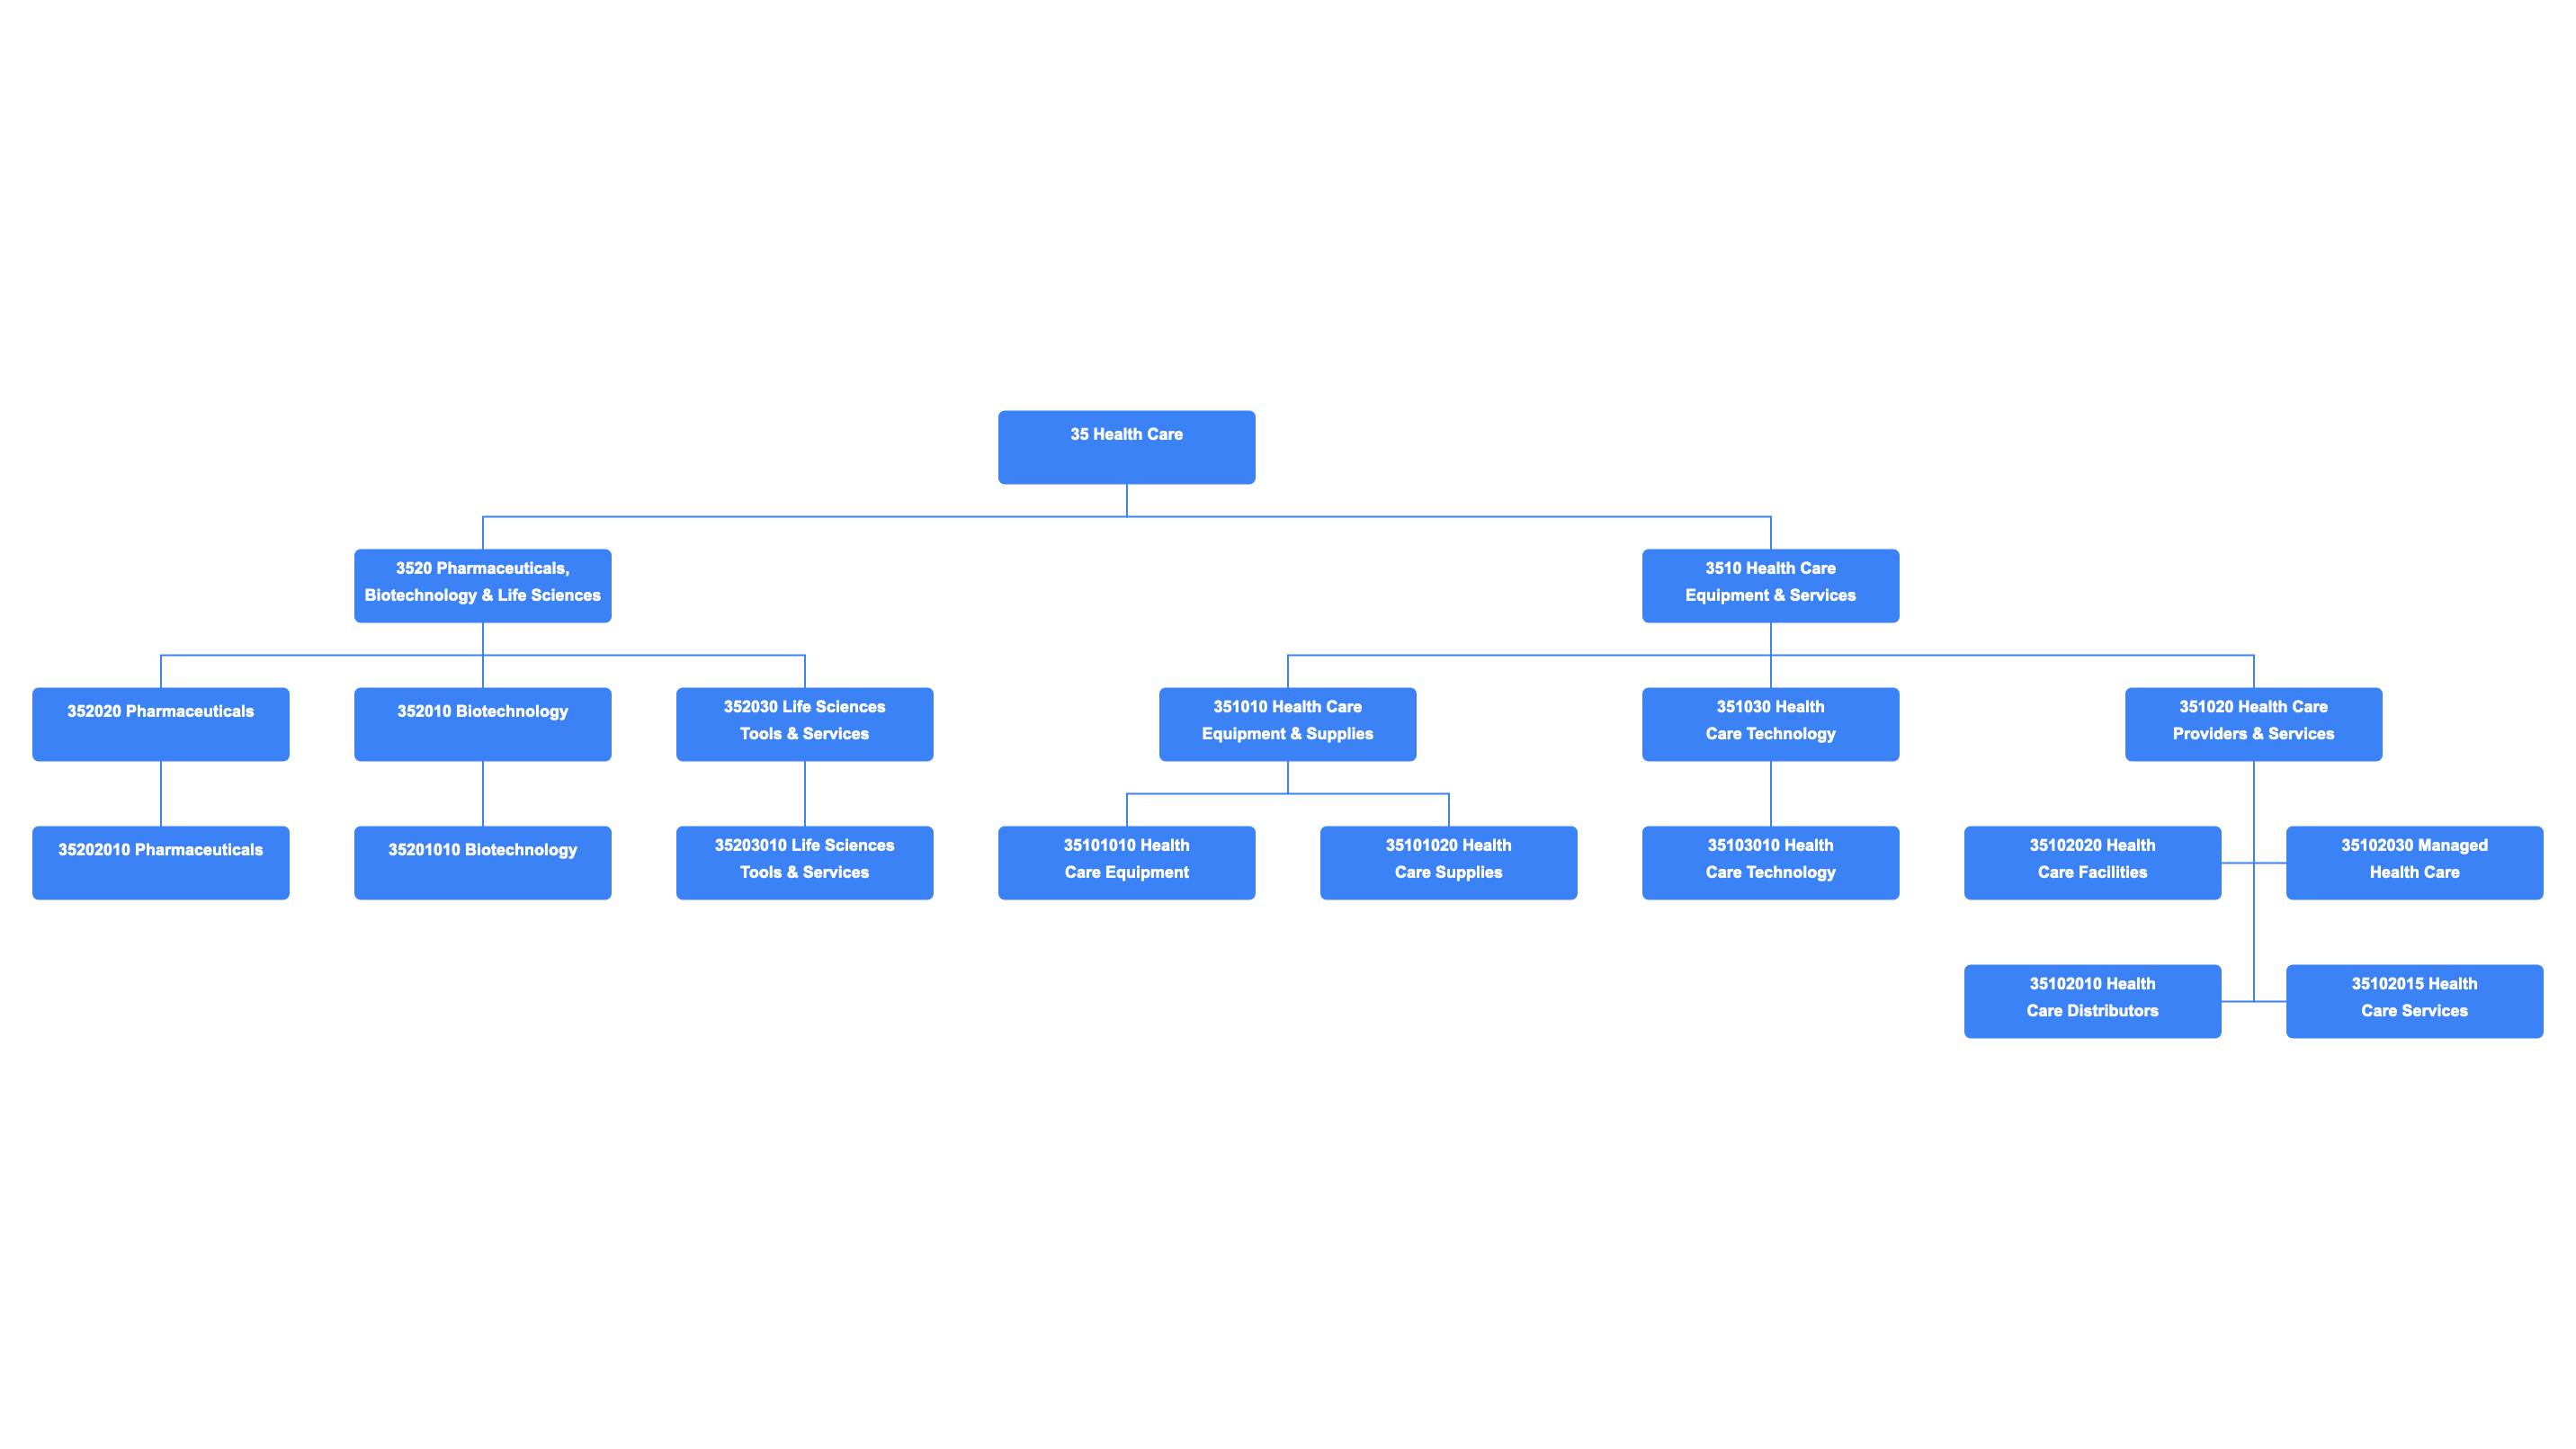 Hierarchy chart for the Global Industry Classification Standard (GICS) - Health Care sector